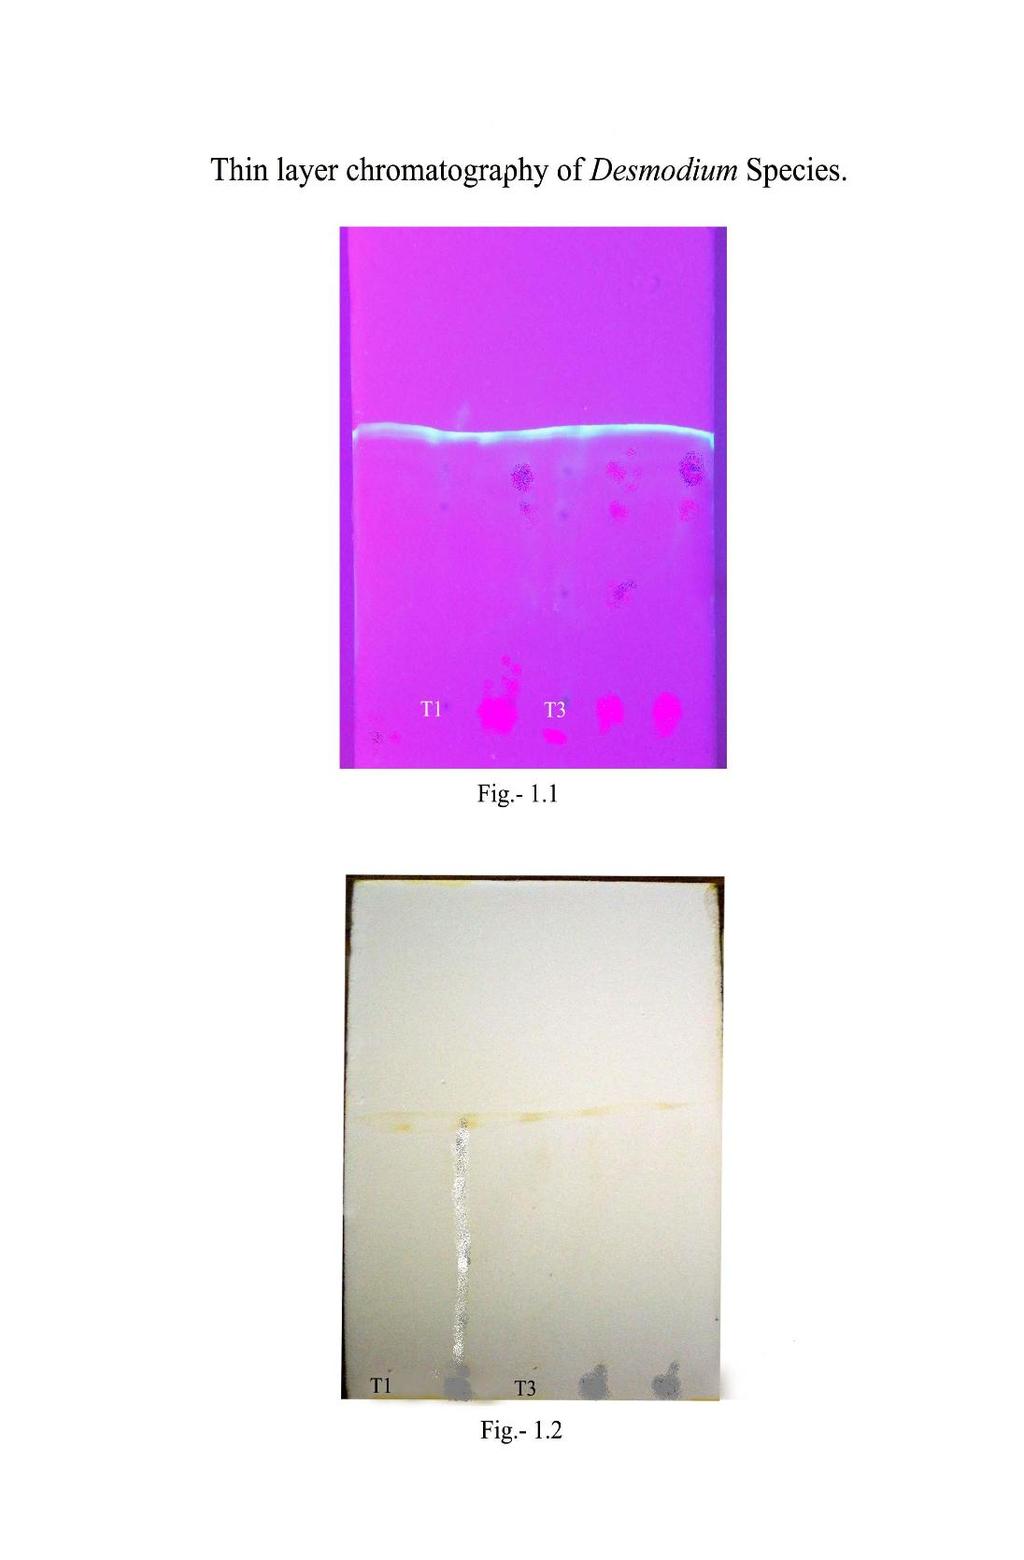 PLATE-1 Thin layer chromatography of Desmodium gangaticum and other species. Stationary phase: T.L.C.